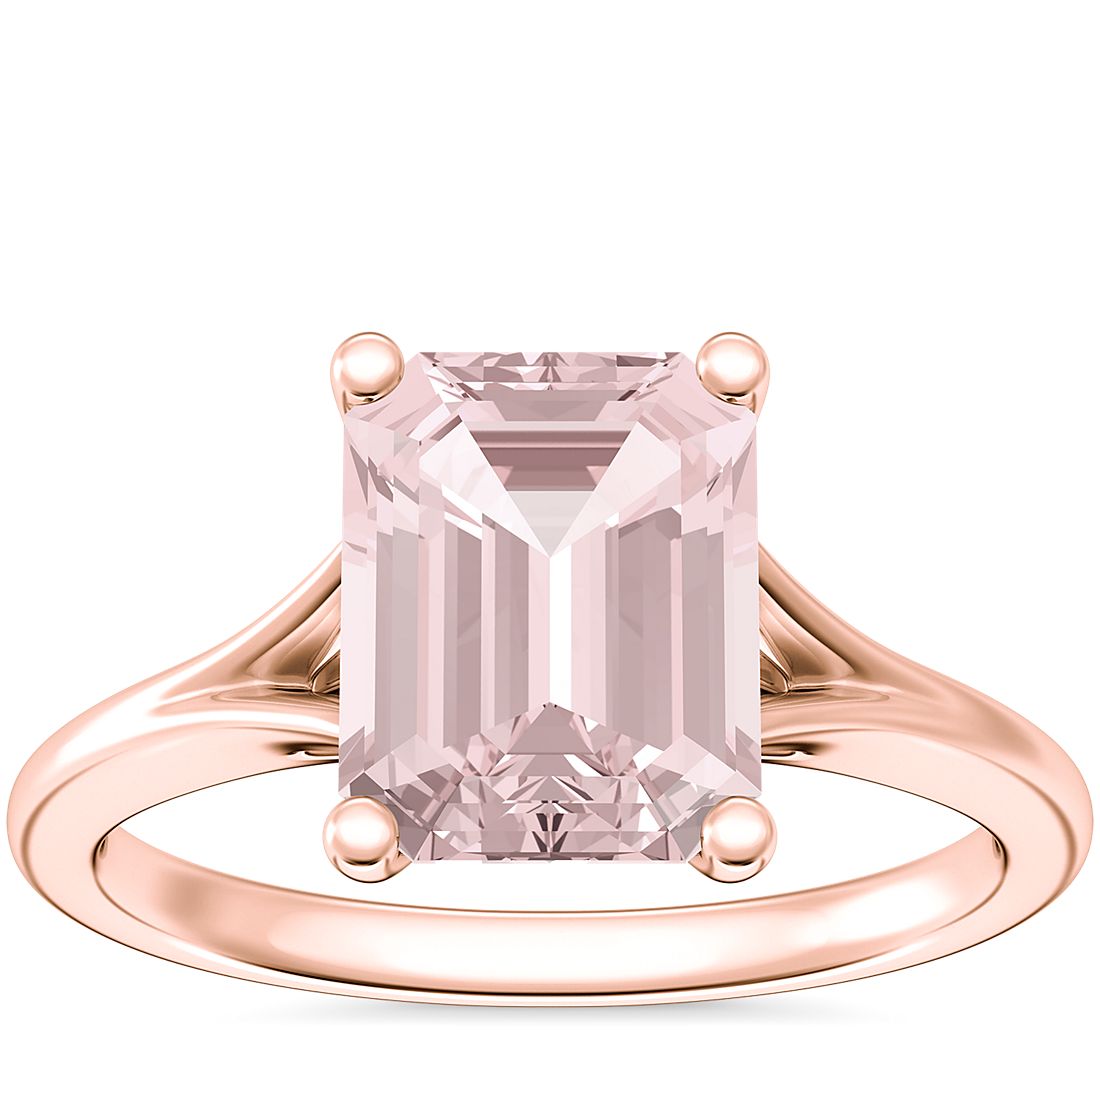 Petite Split Shank Solitaire Engagement Ring with Emerald-Cut Morganite in 14k Rose Gold (9x7mm)